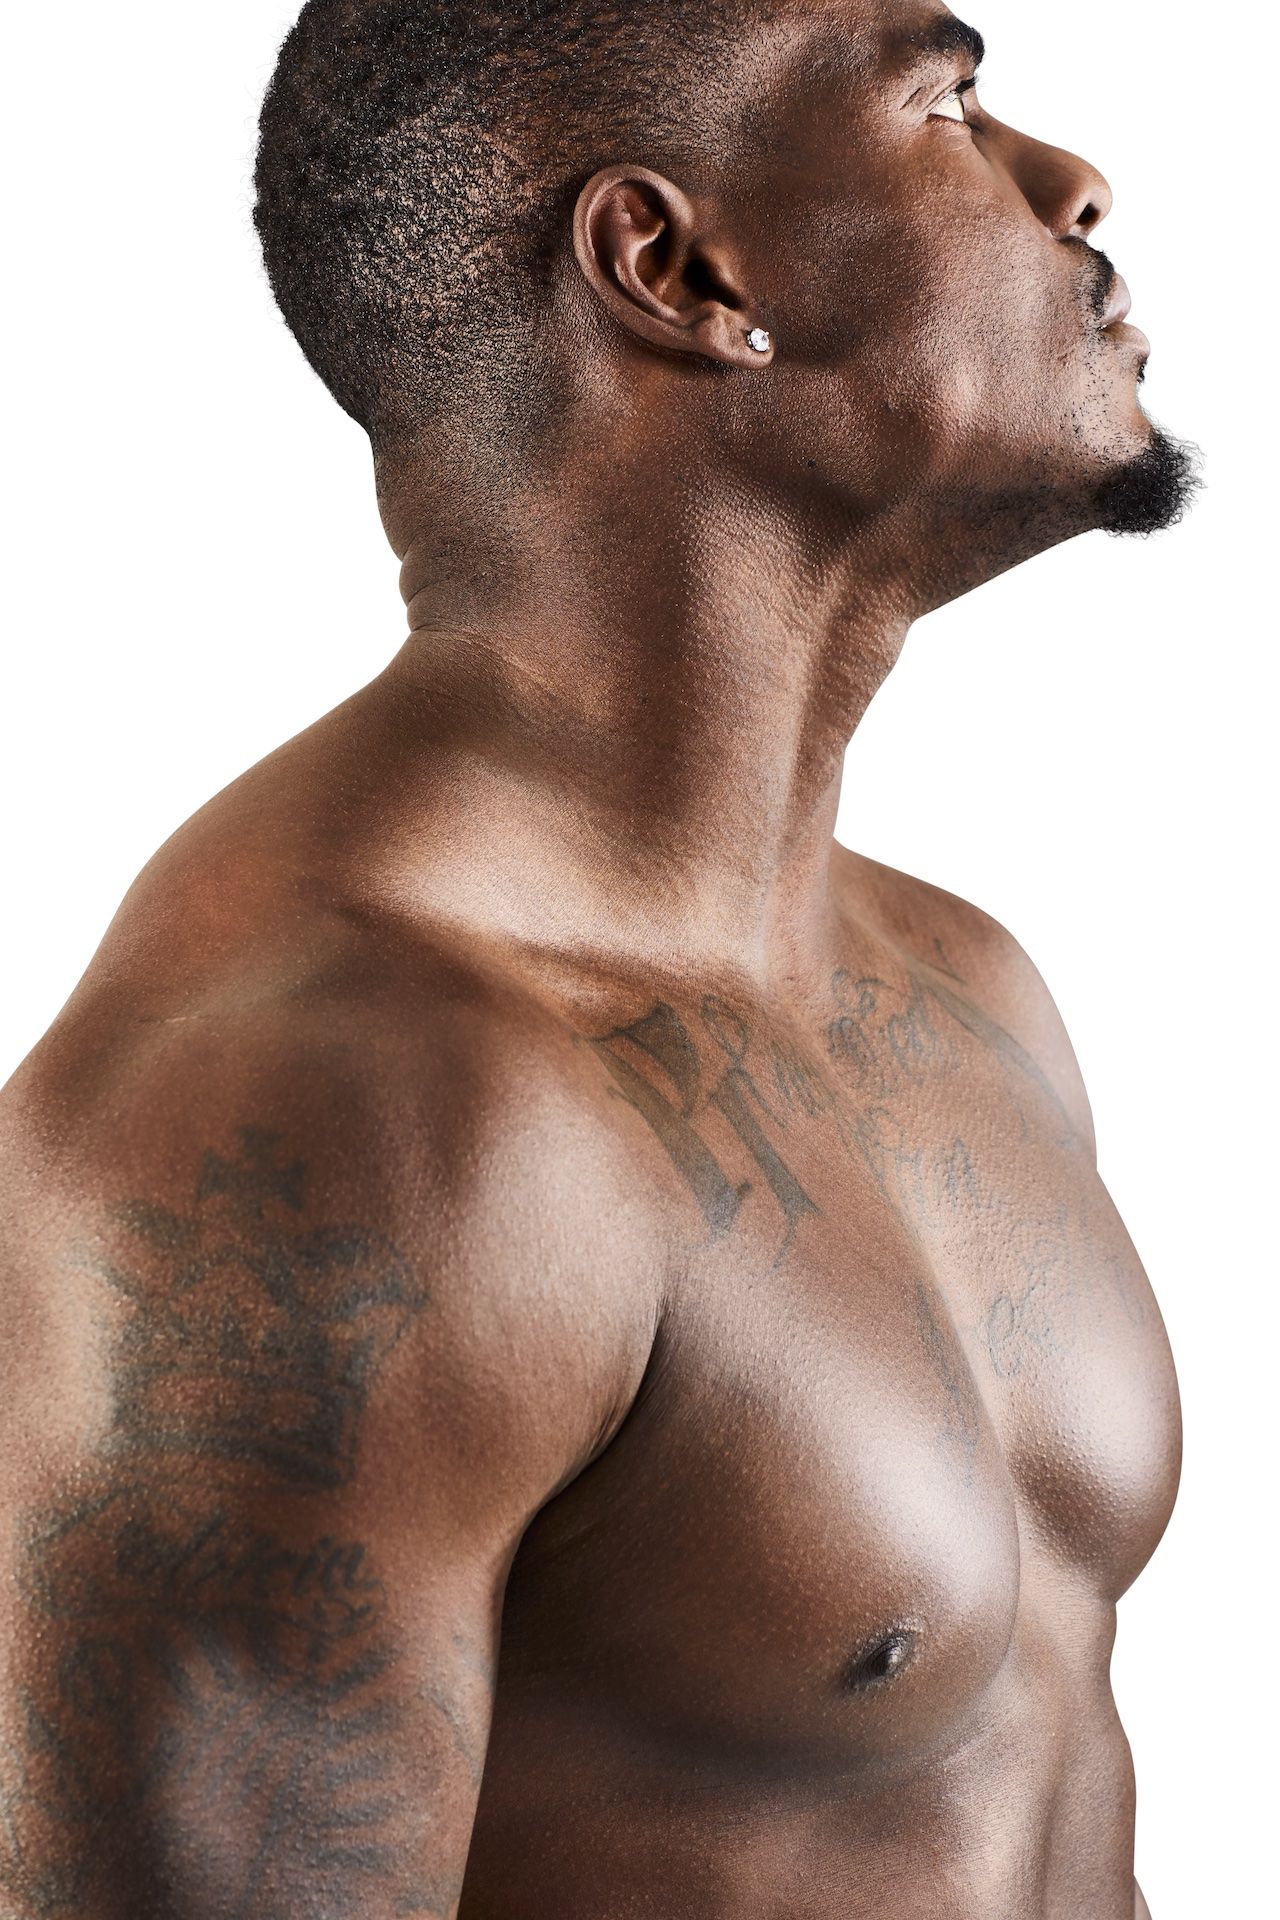 How To Get A Thick And Muscular Neck With 4 Exercises